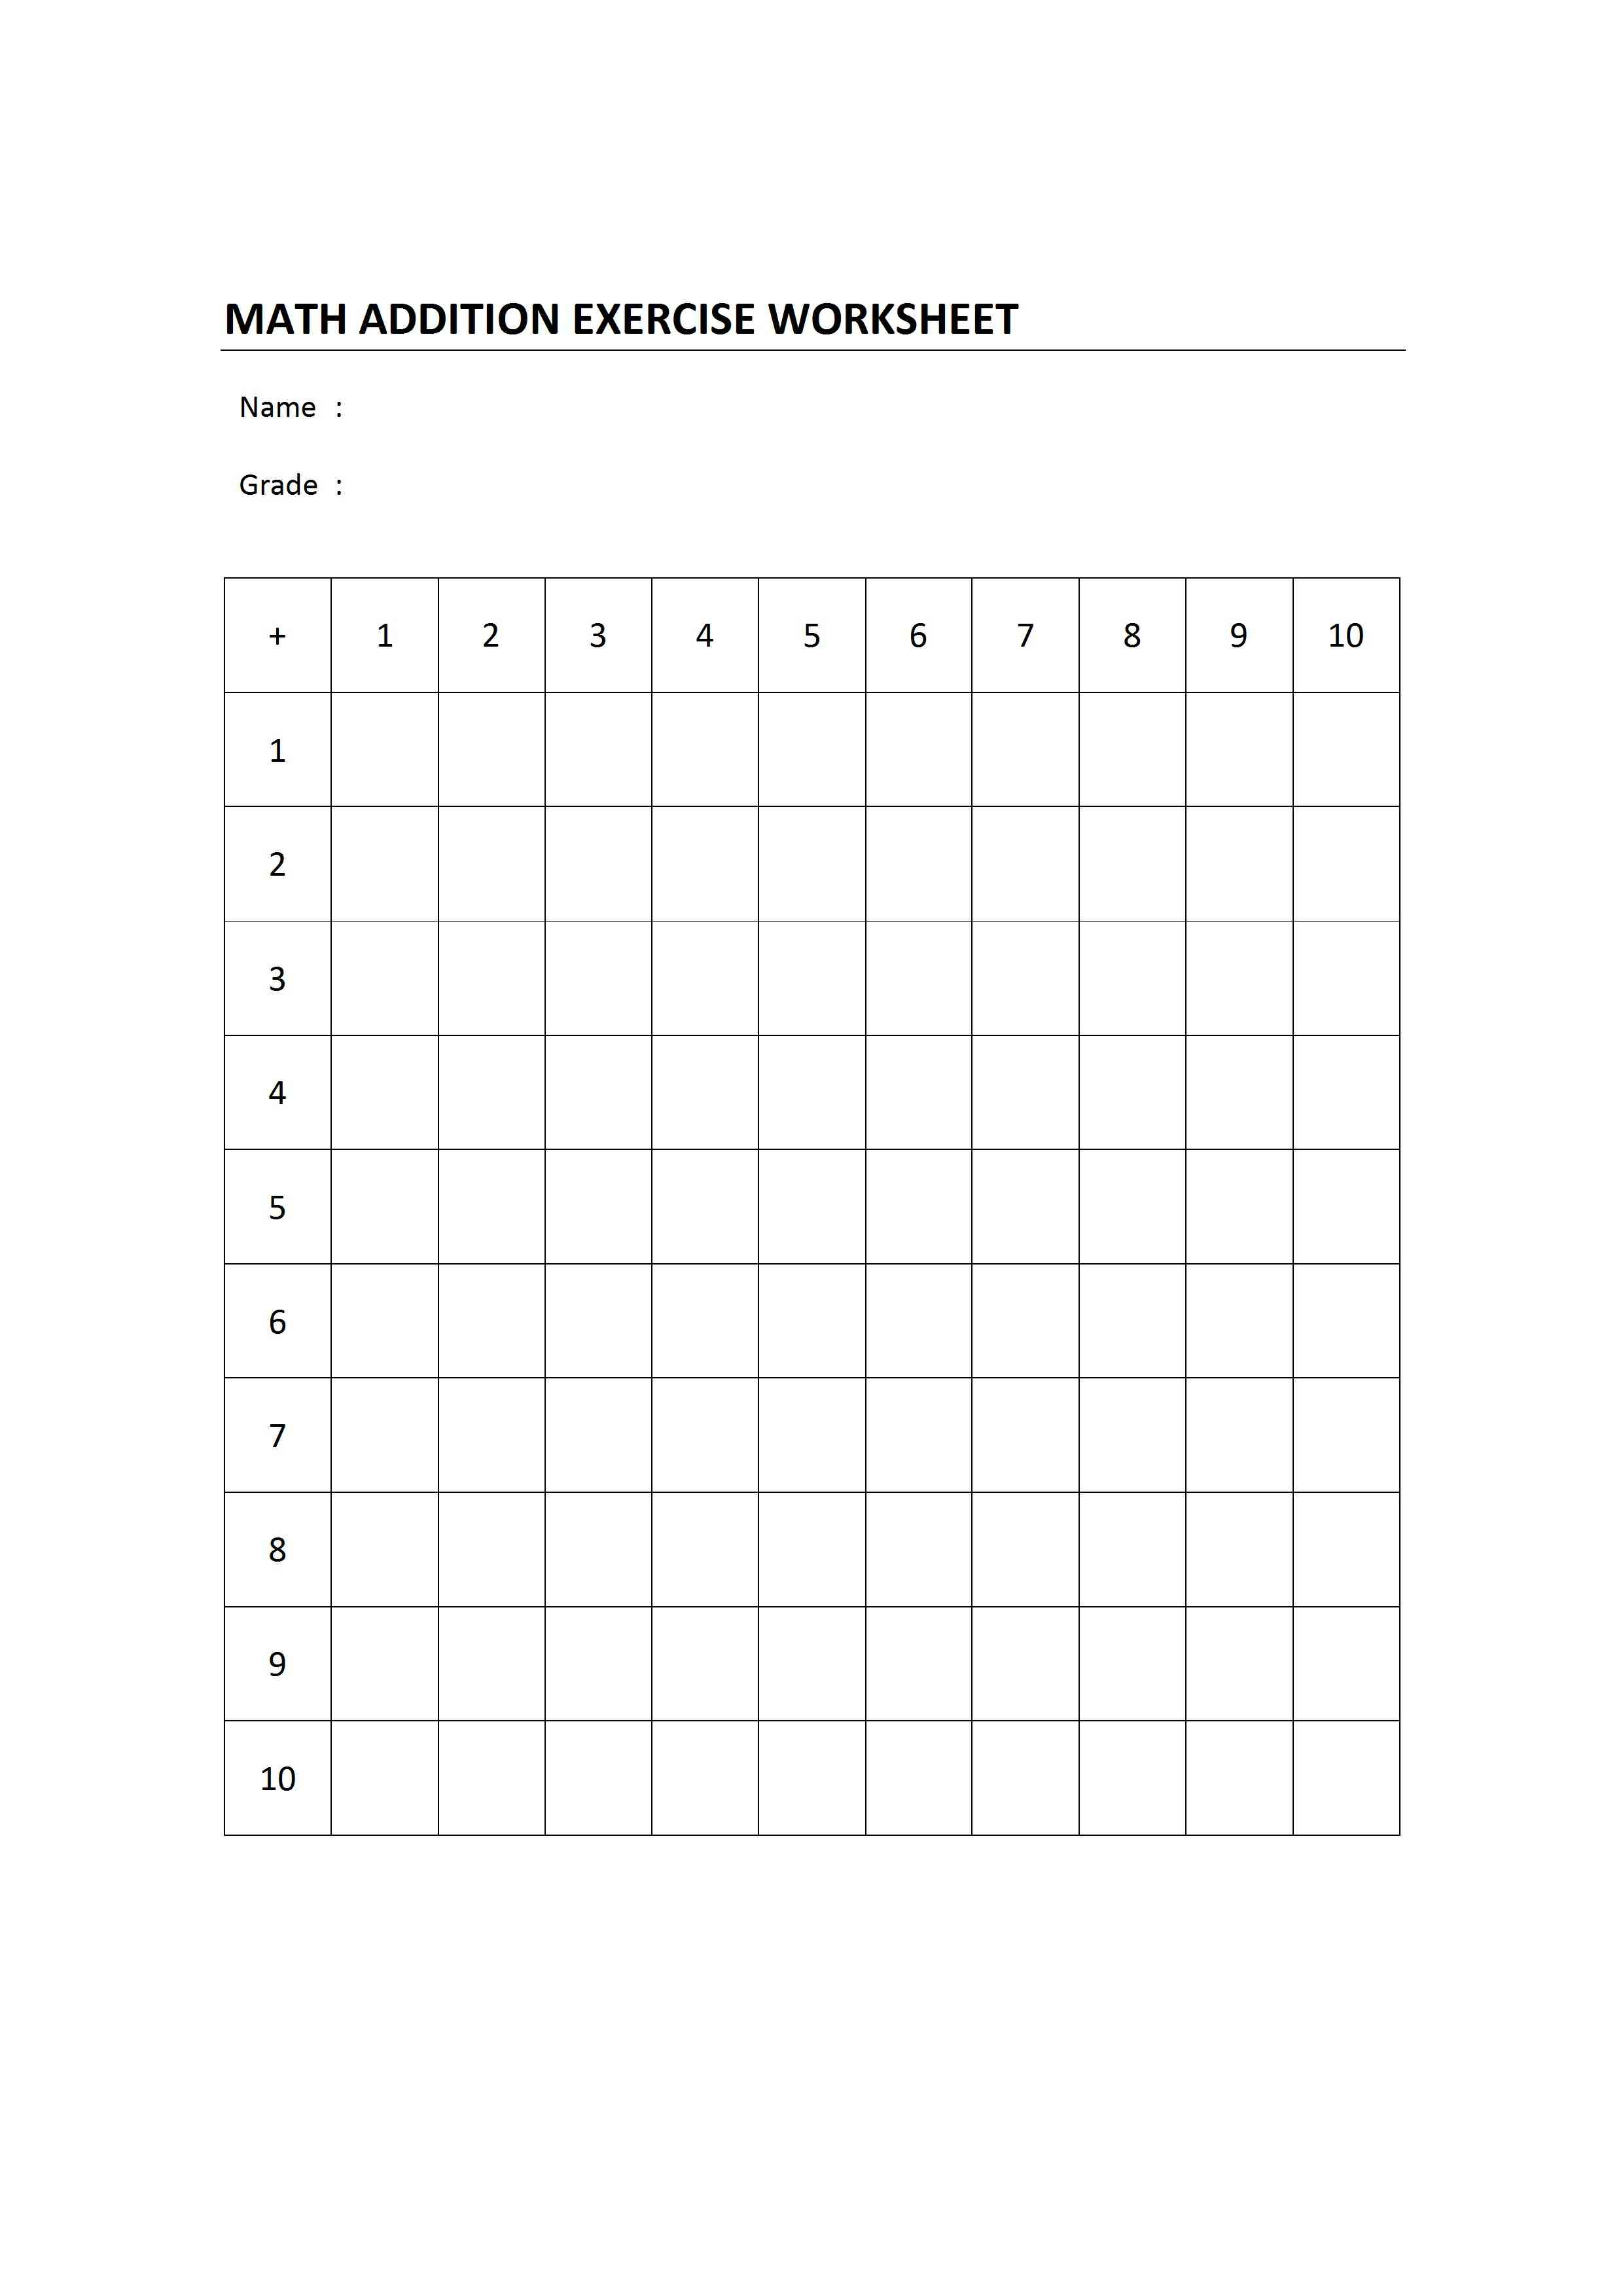 print-these-free-2-digit-addition-worksheets-for-use-at-home-or-in